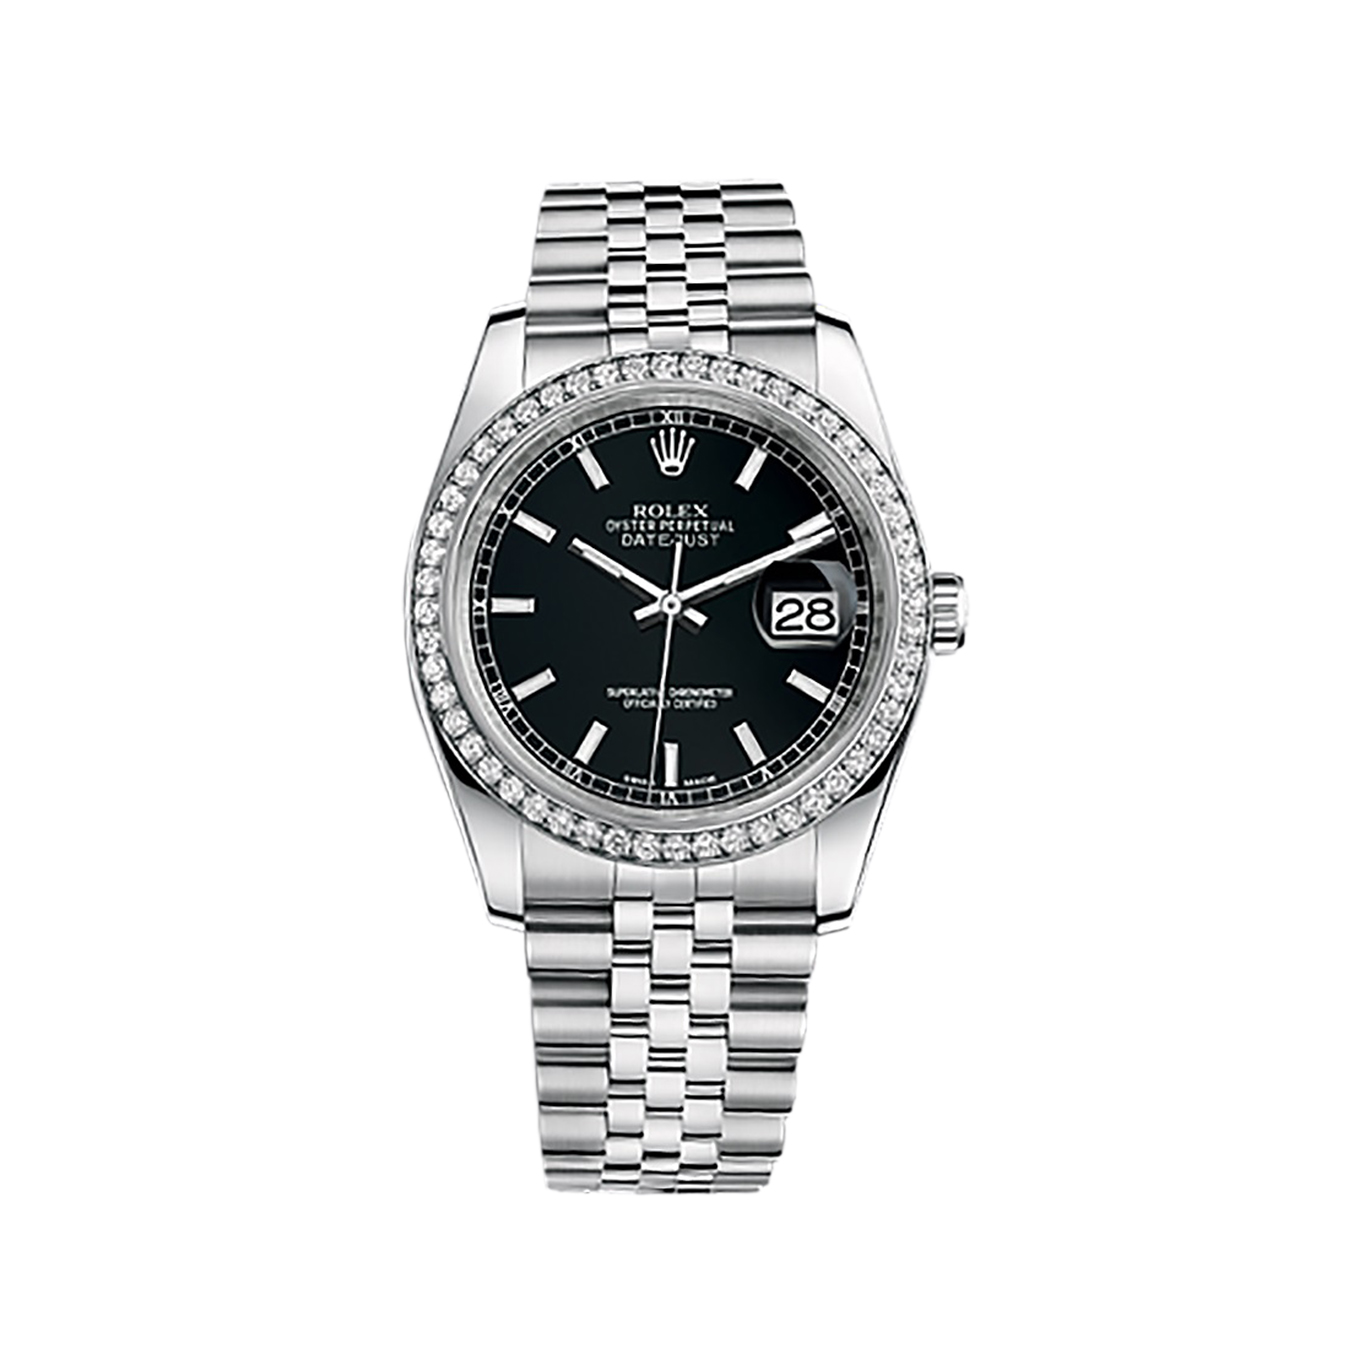 Datejust 36 116244 White Gold & Stainless Steel Watch (Black) - Click Image to Close